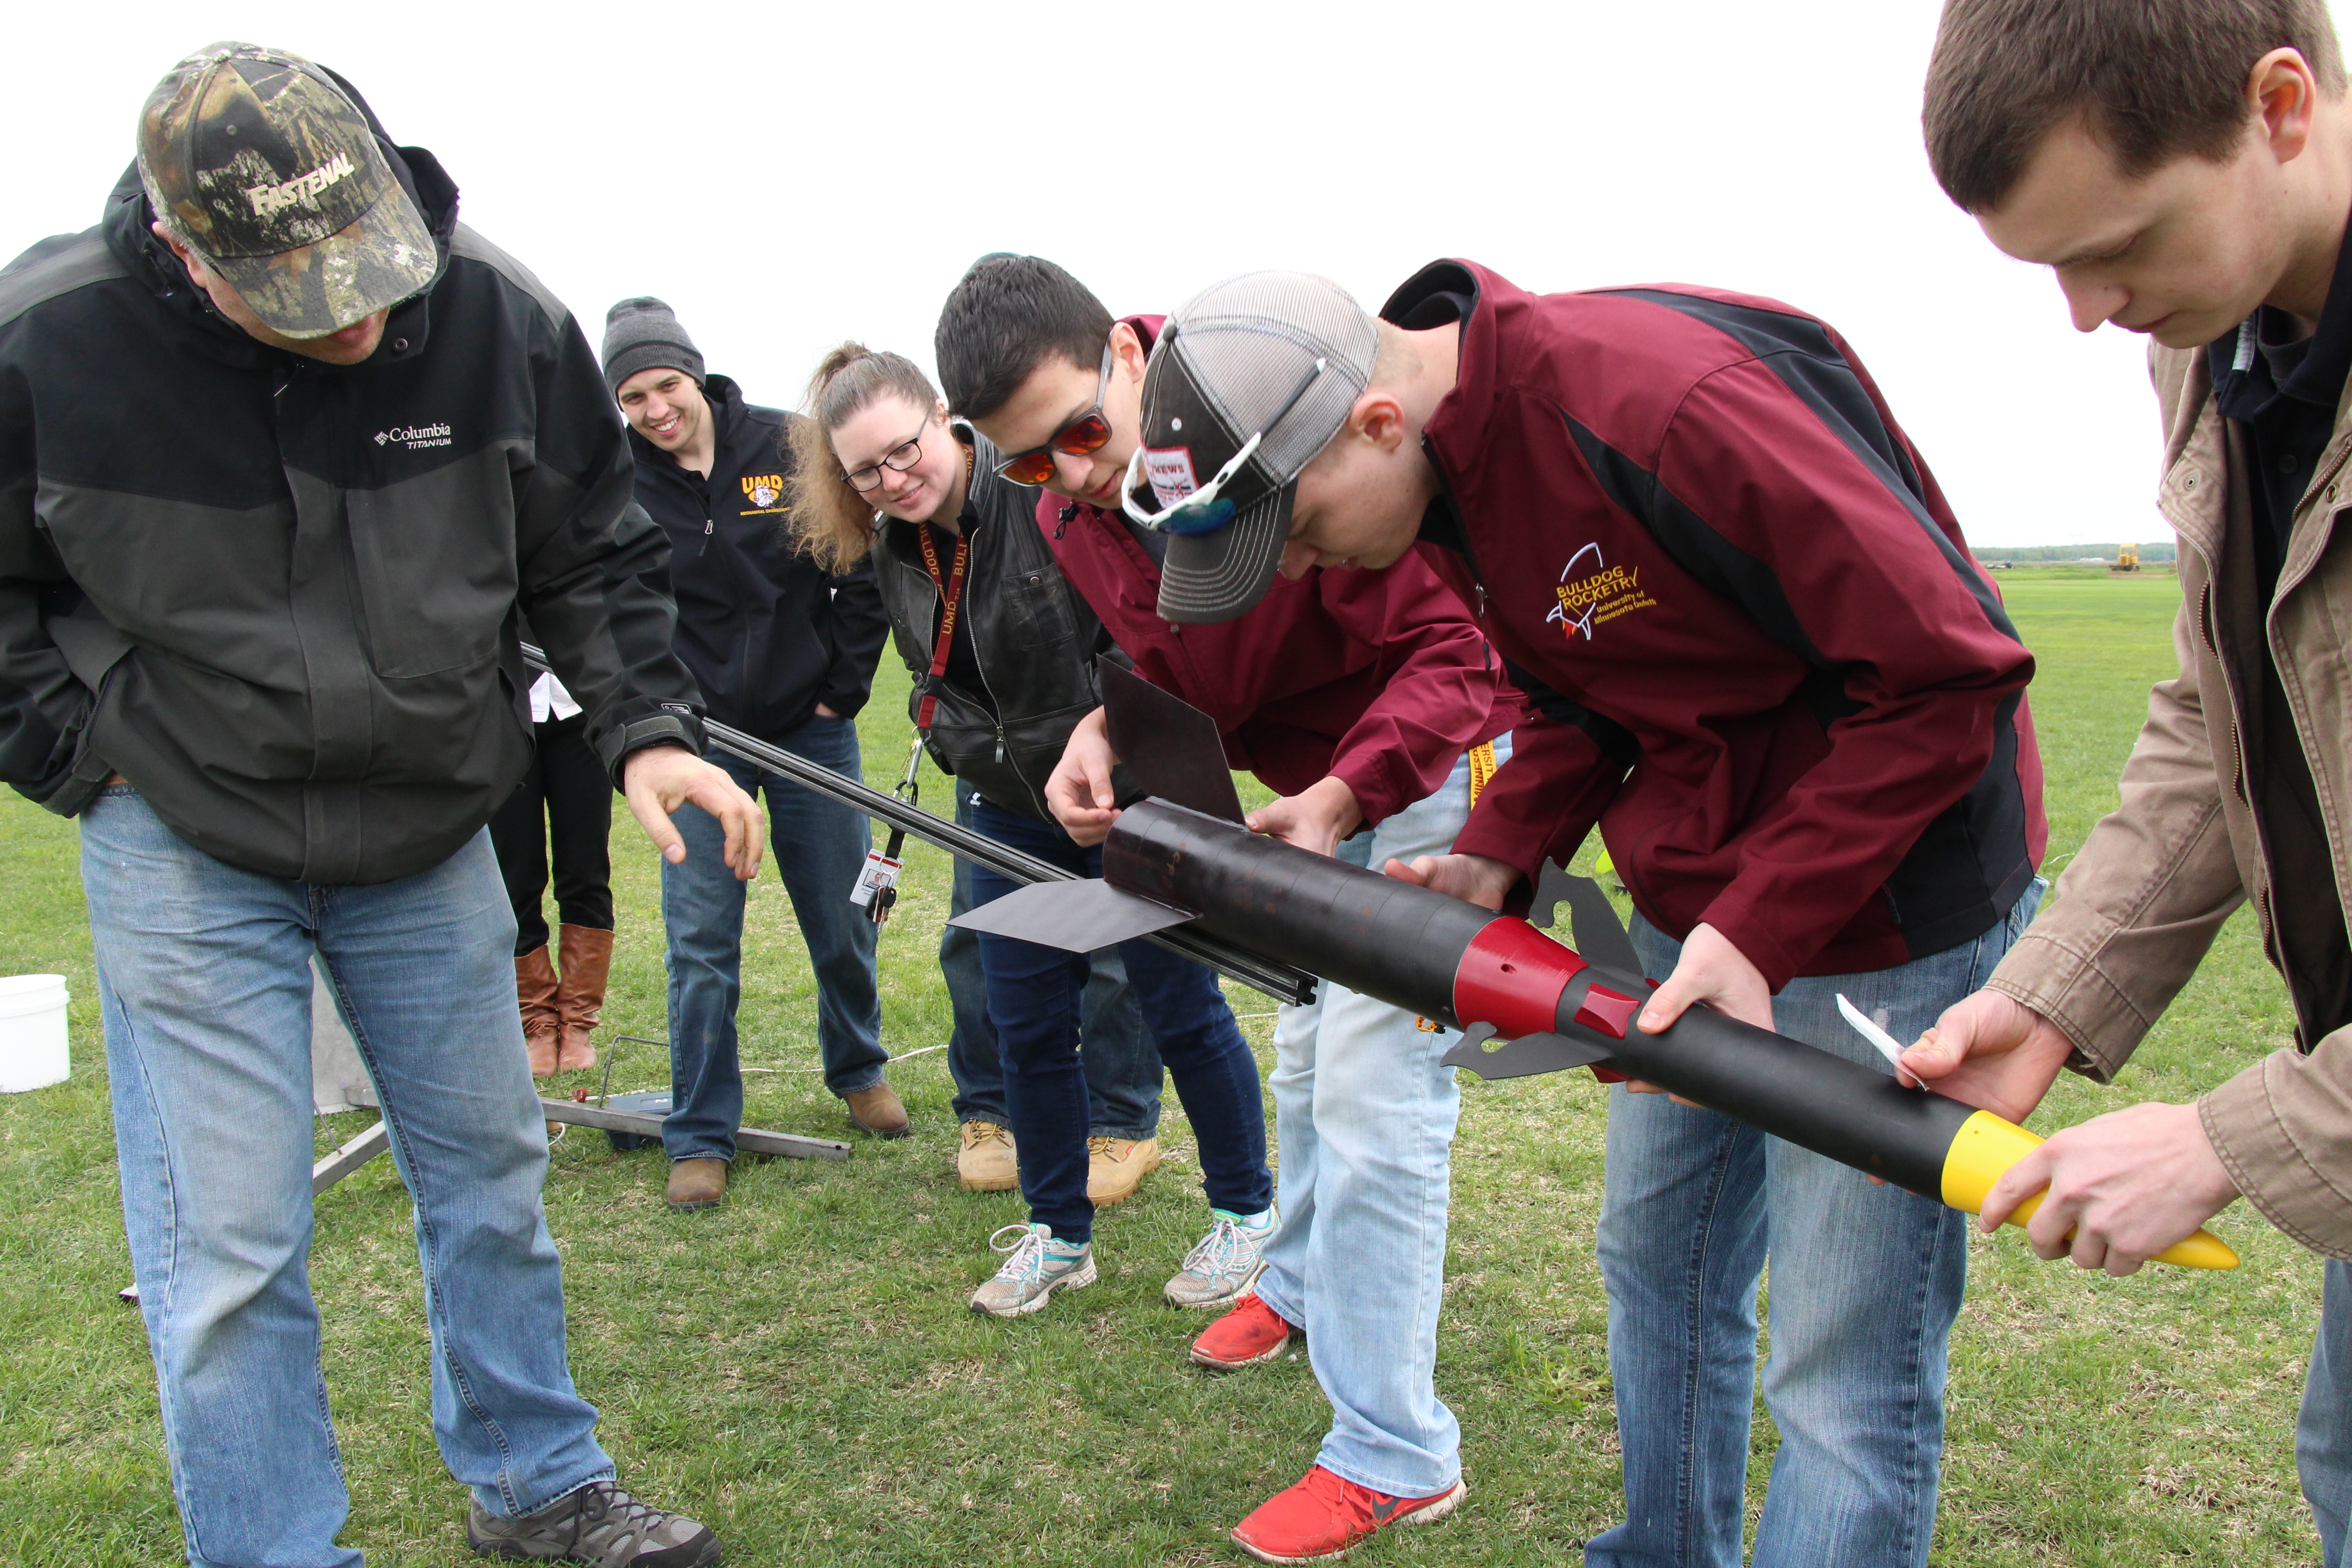 Members of the UMD Bulldog Rocketry Club standing and bending over looking at a rocket.